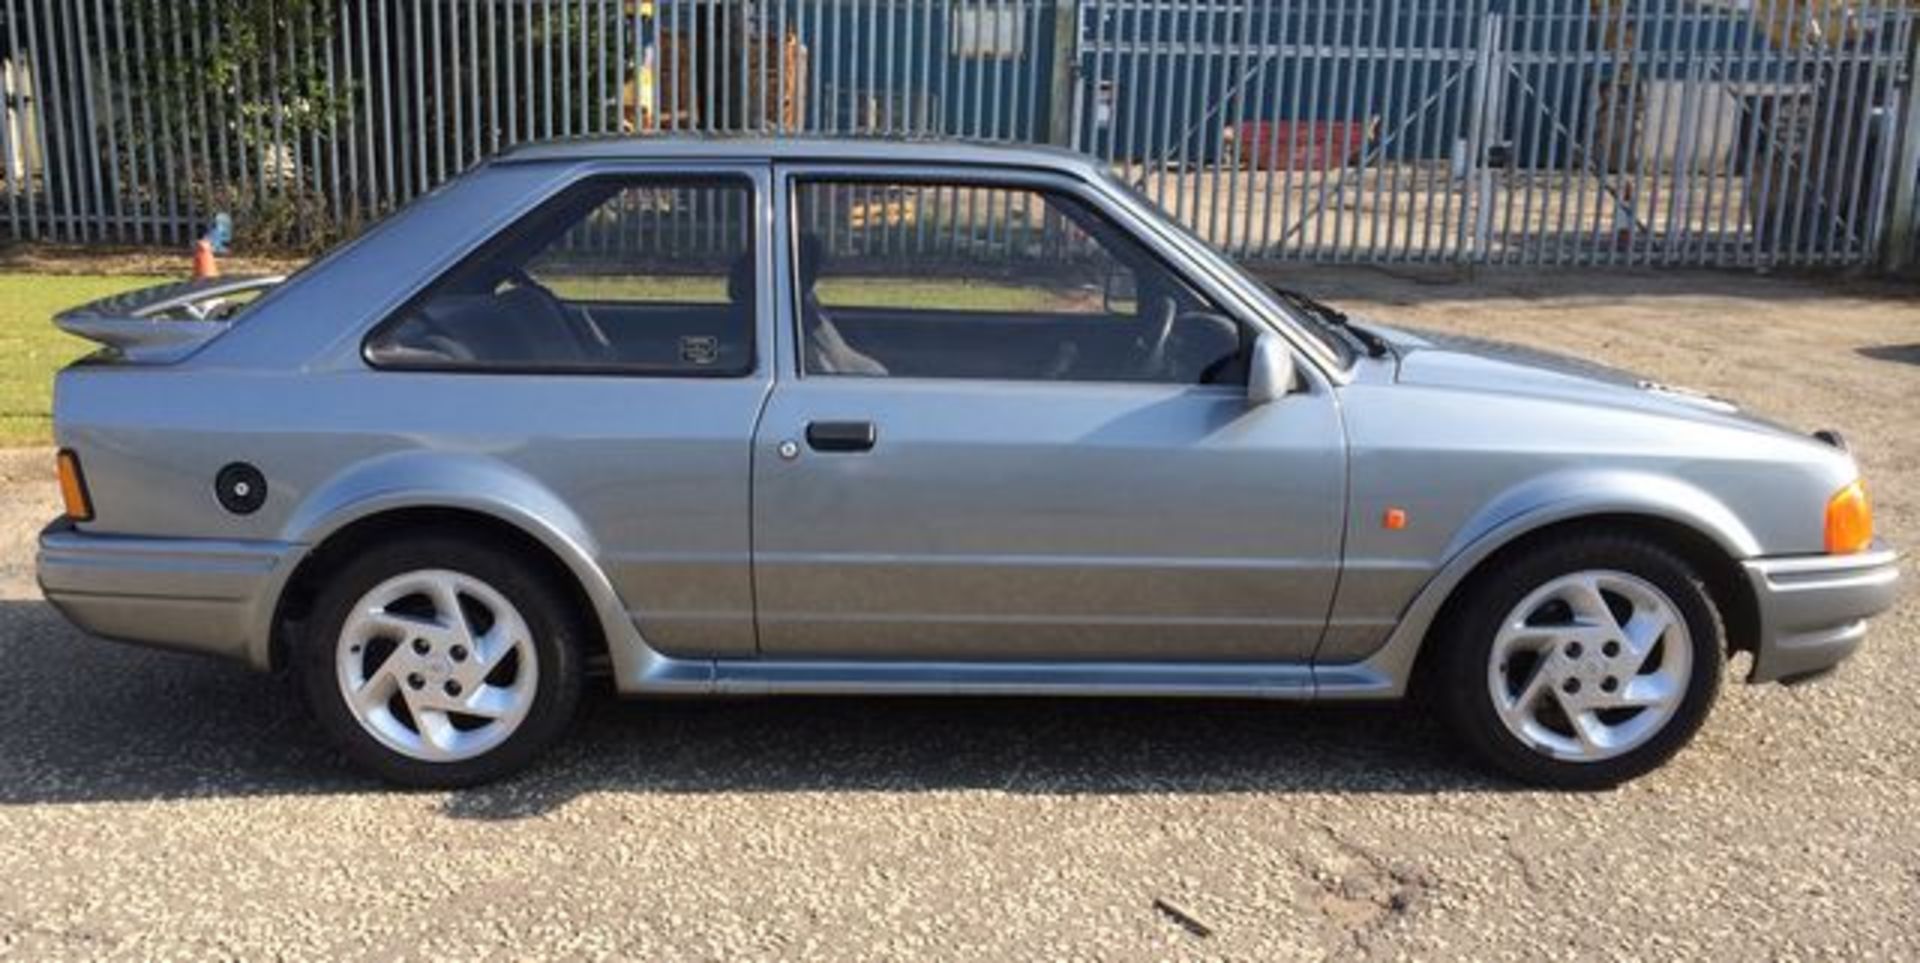 FORD, ESCORT RS TURBO - 1597cc, Chassis number WF0BXXGCABGU81844 - the vendor states this to be a - Image 2 of 7